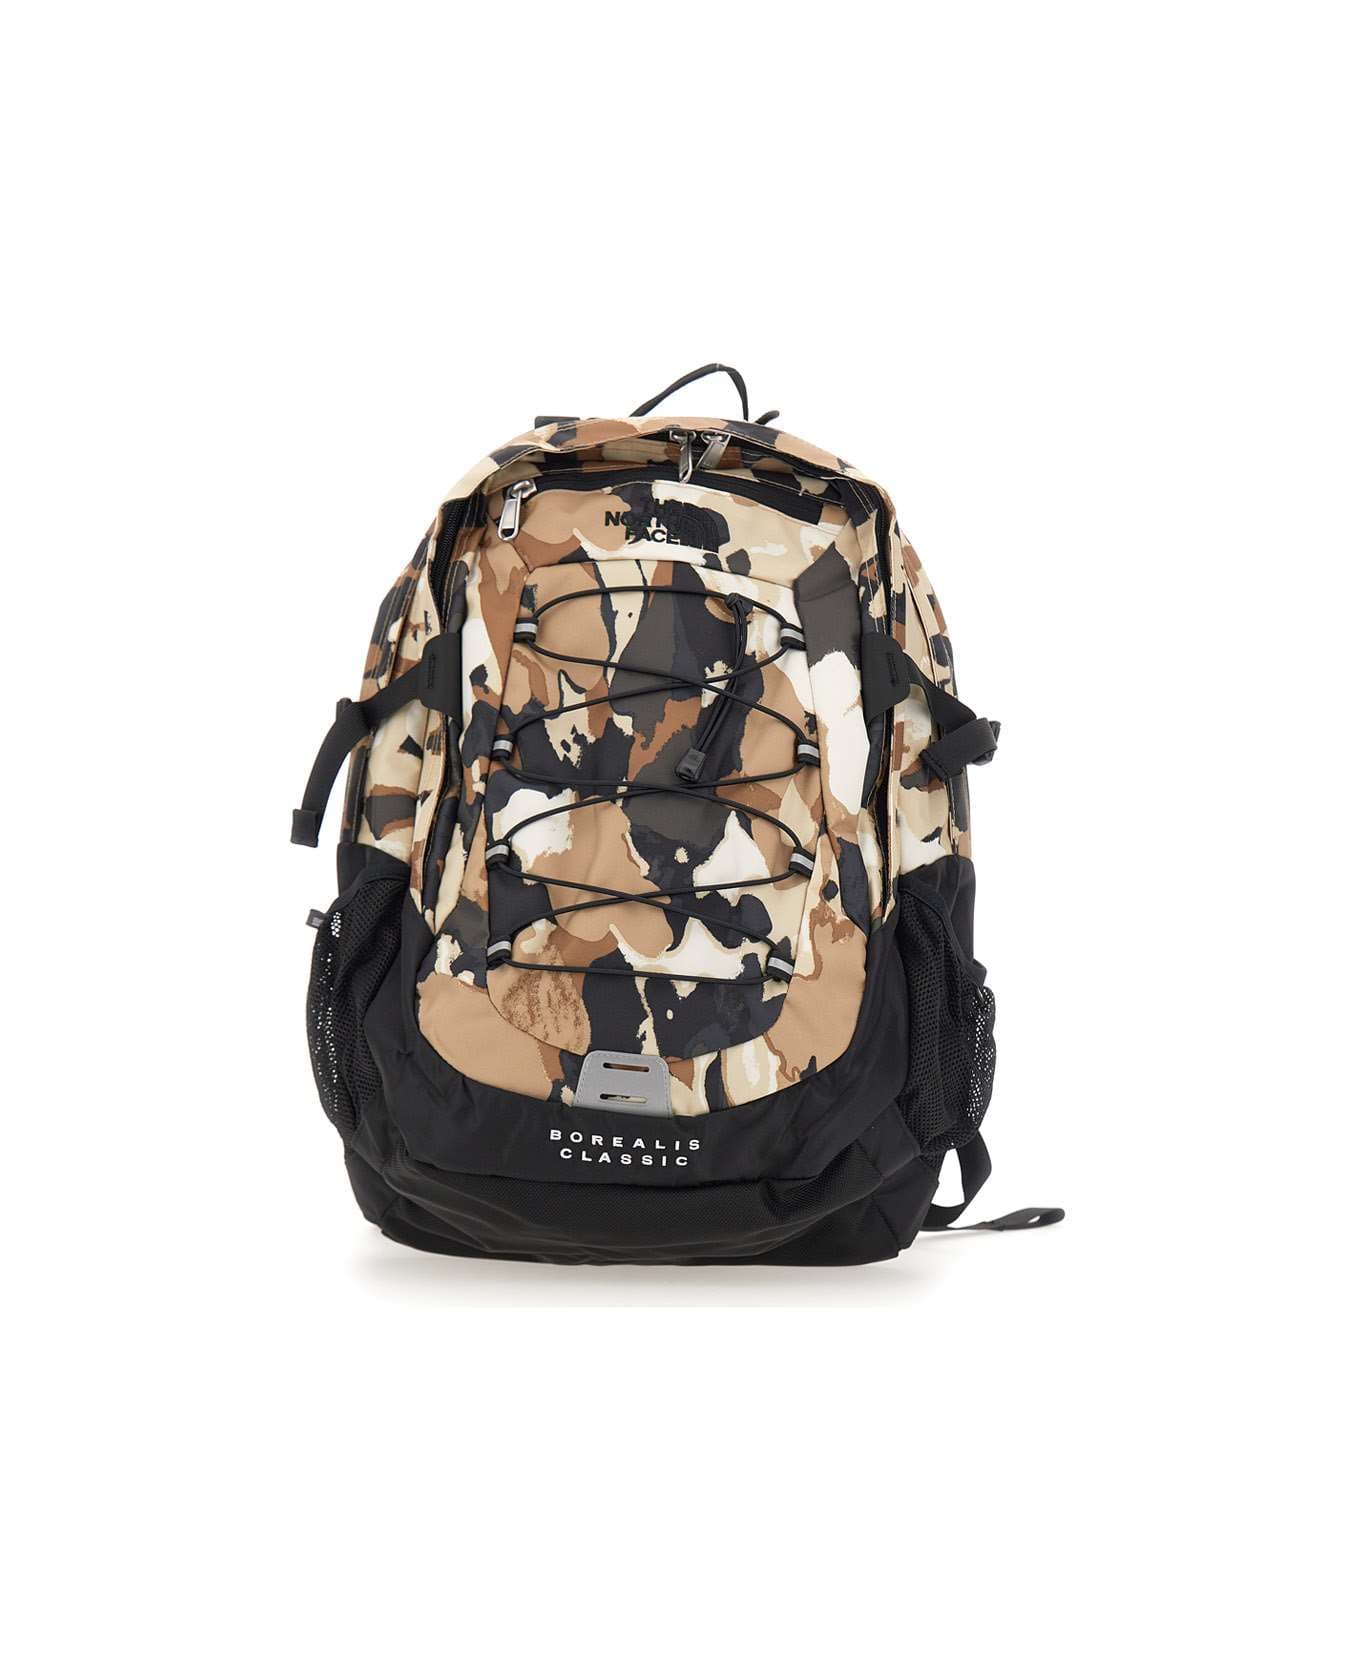 The North Face 'borealis Classic' Backpack - BLACK/GREEN